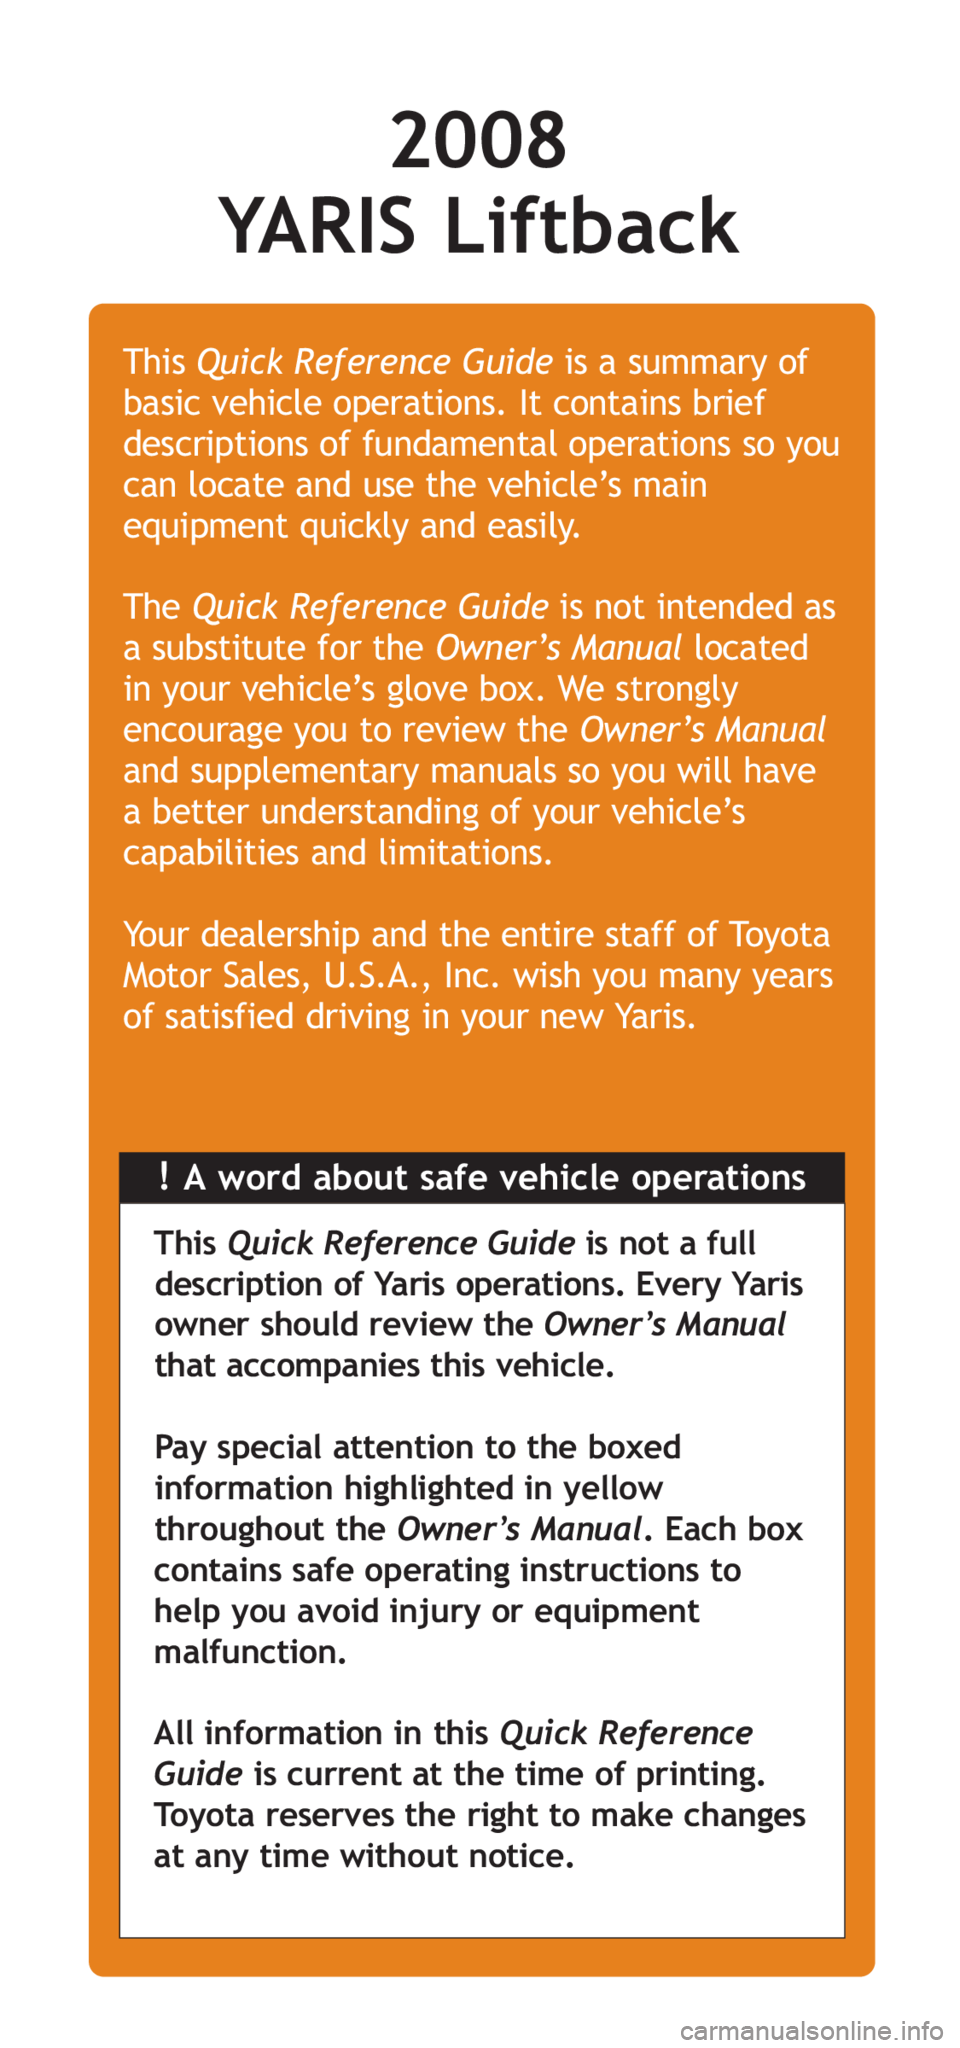 TOYOTA YARIS HATCHBACK 2008  Owners Manual 2008 
YARIS Liftback
!A word about safe vehicle operations
This 
Quick Reference Guide is a summary of
basic vehicle operations. It contains brief
descriptions of fundamental operations so you
can loc